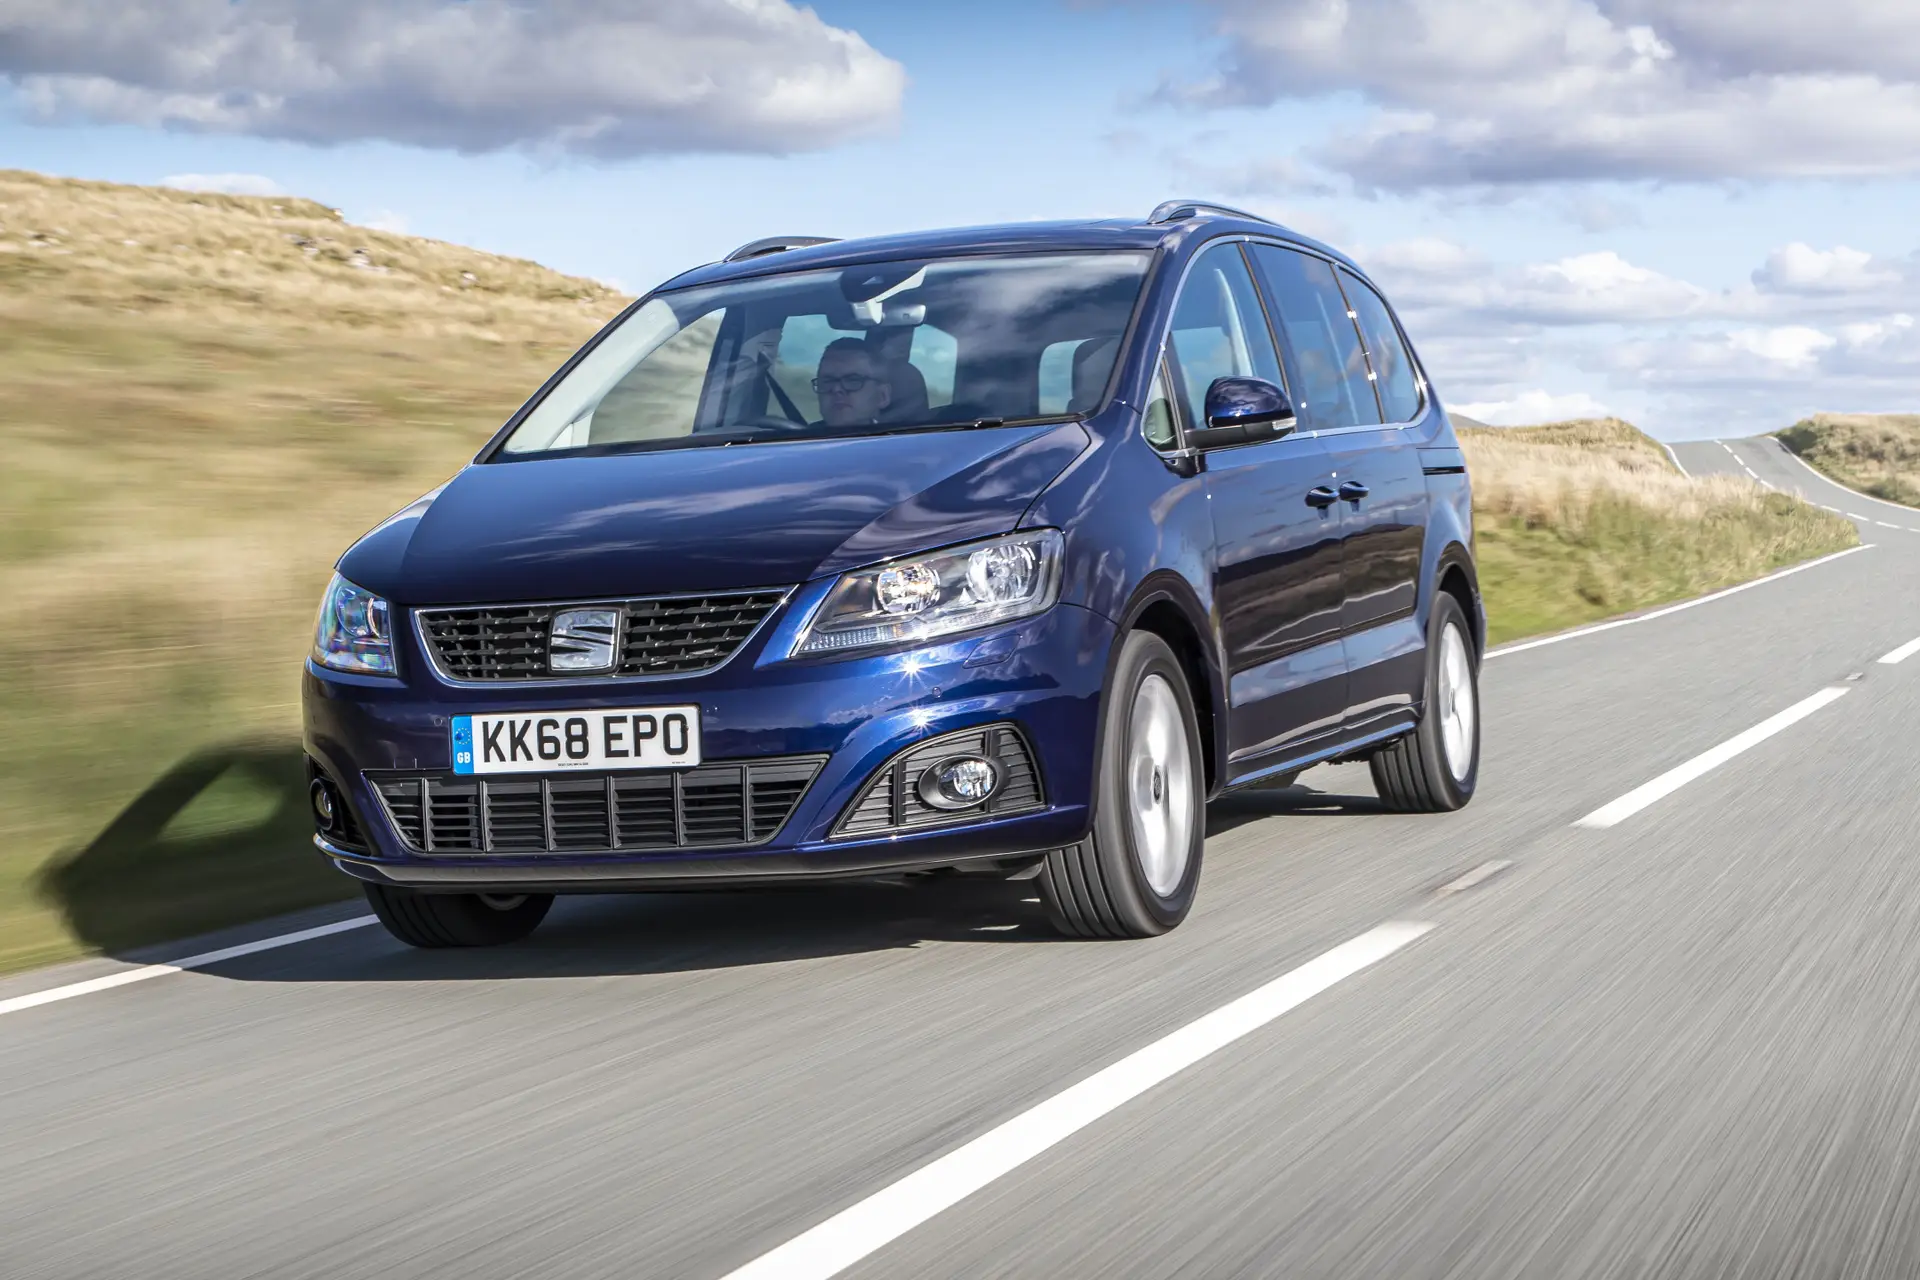 Seat Alhambra dimensions, boot space and similars